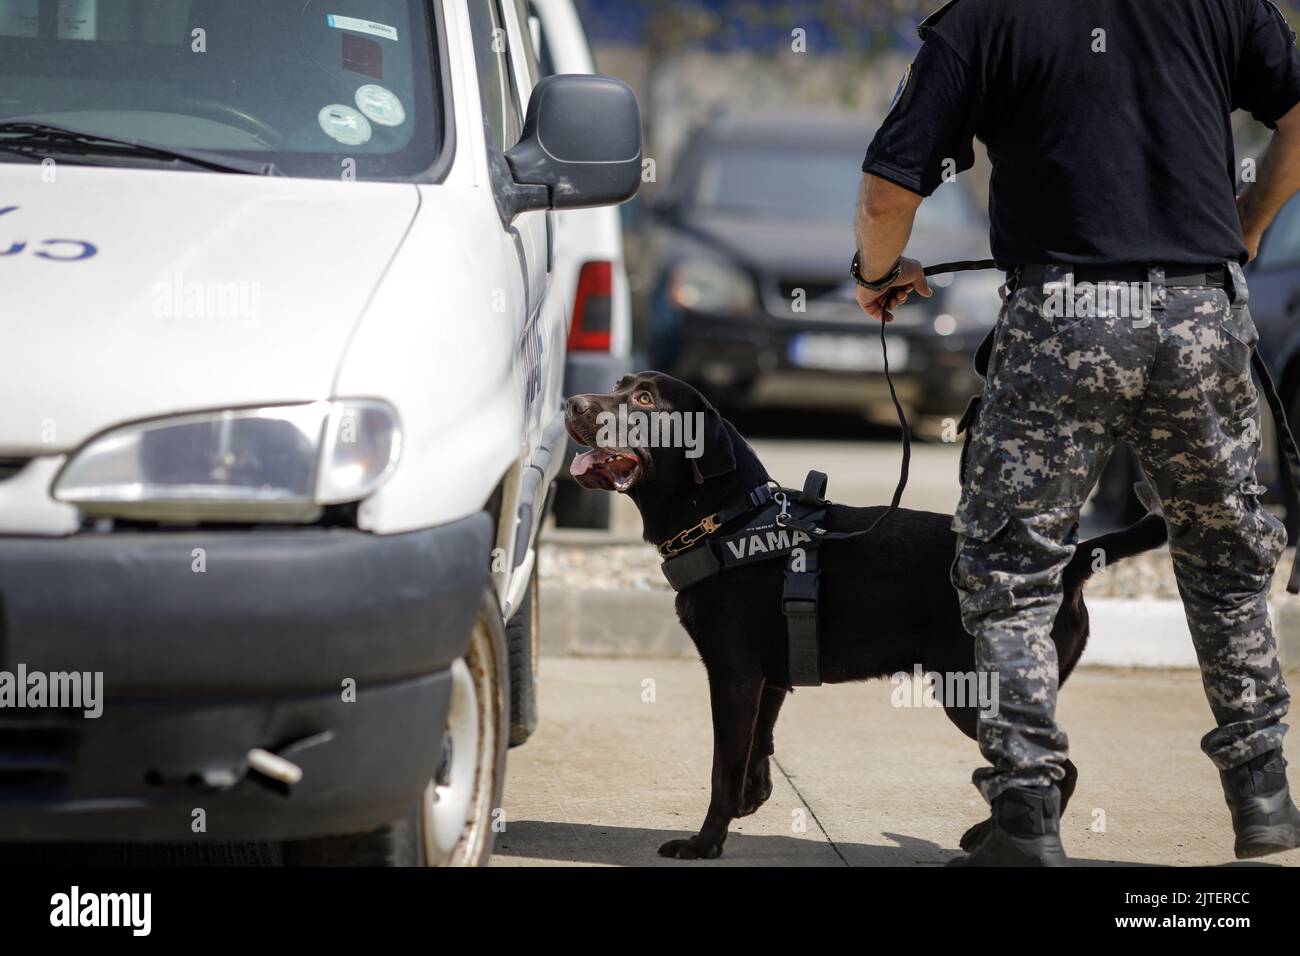 Bucharest, Romania - August 30, 2022: Officer from the Romanian customs train a service dog to detect drugs and ammunition near a car during a drill e Stock Photo